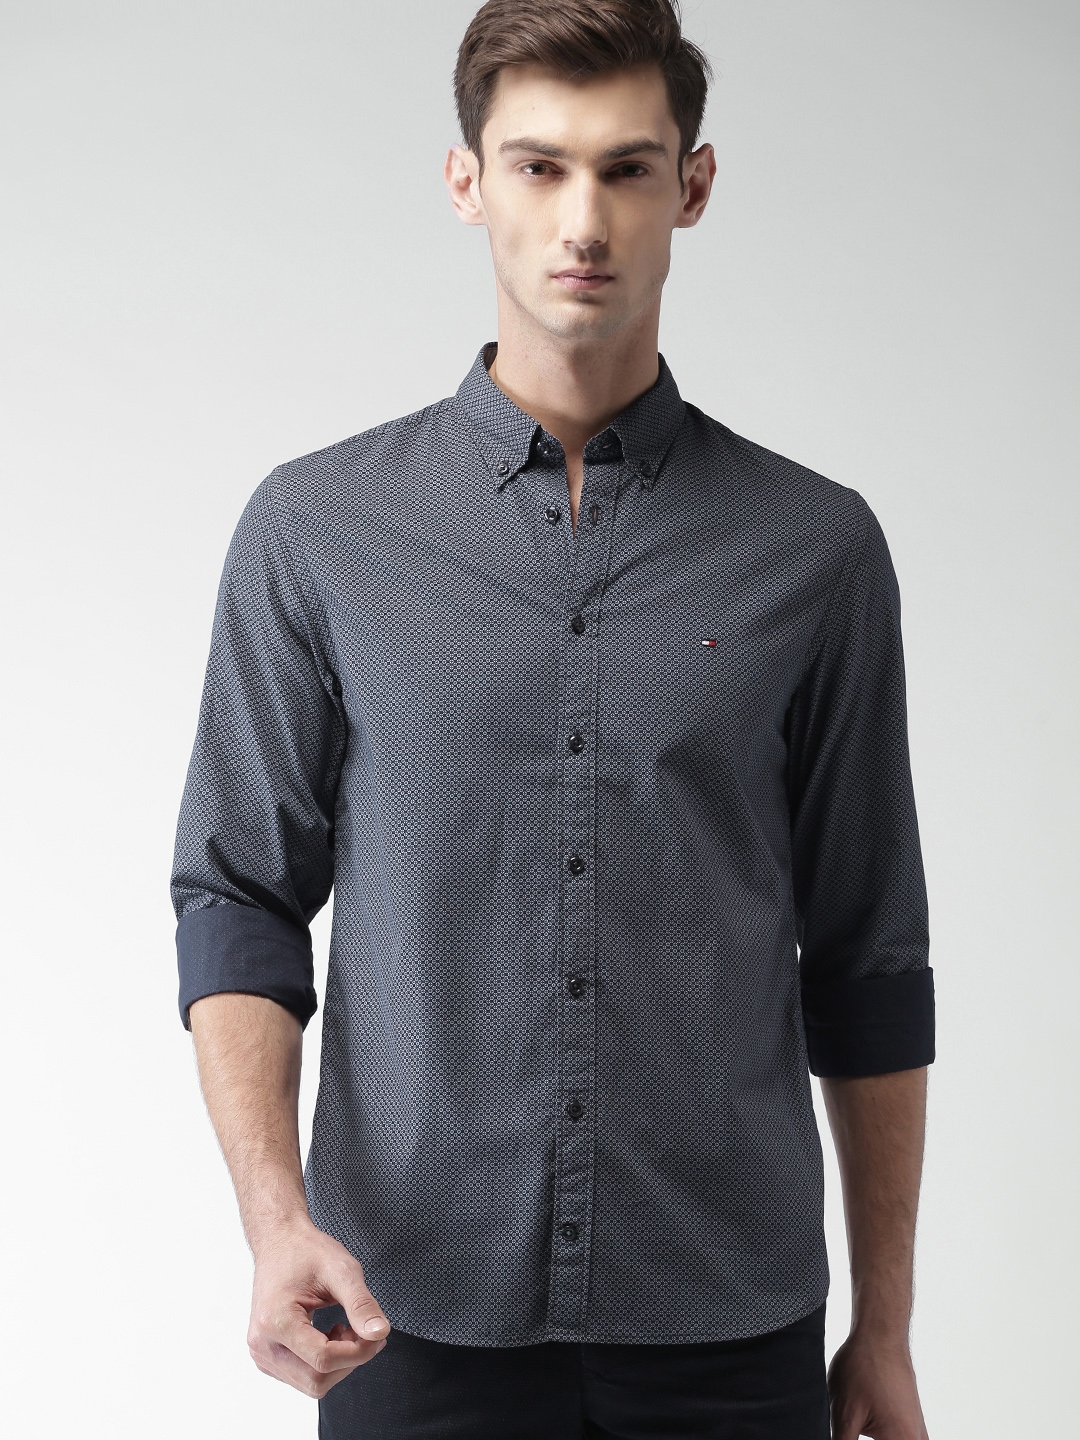 40% OFF on Tommy Hilfiger Blue Printed New York Fit Casual Shirt on Myntra